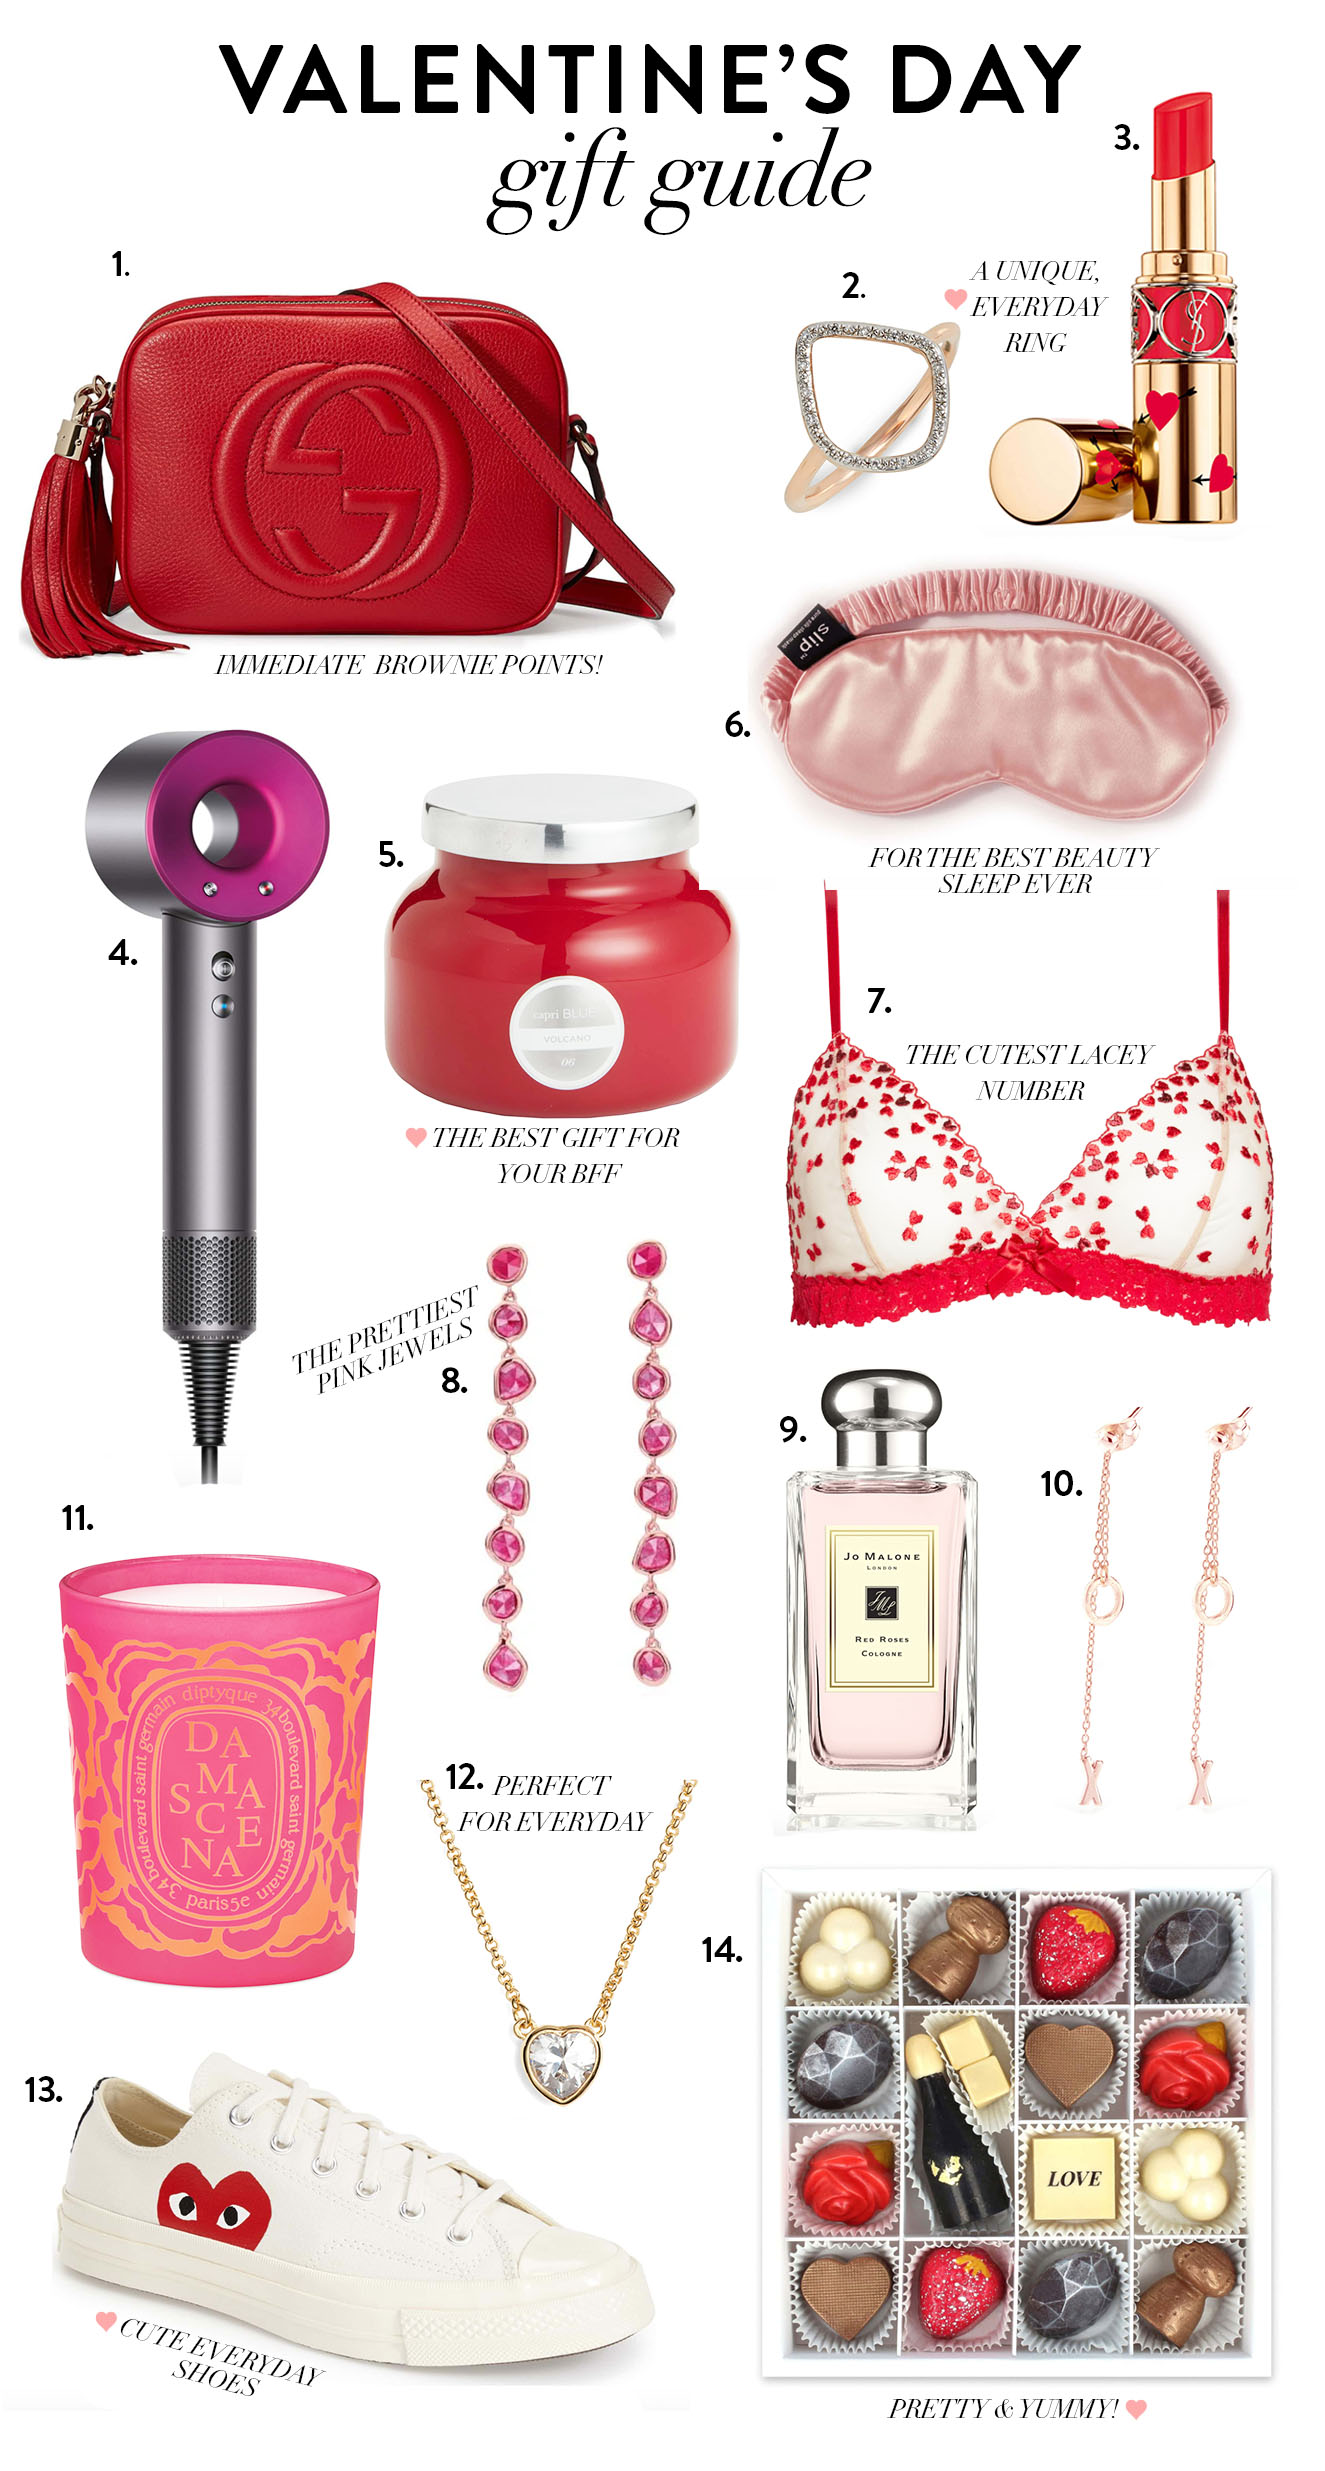 10 Cute Valentine's Day Gifts for Her